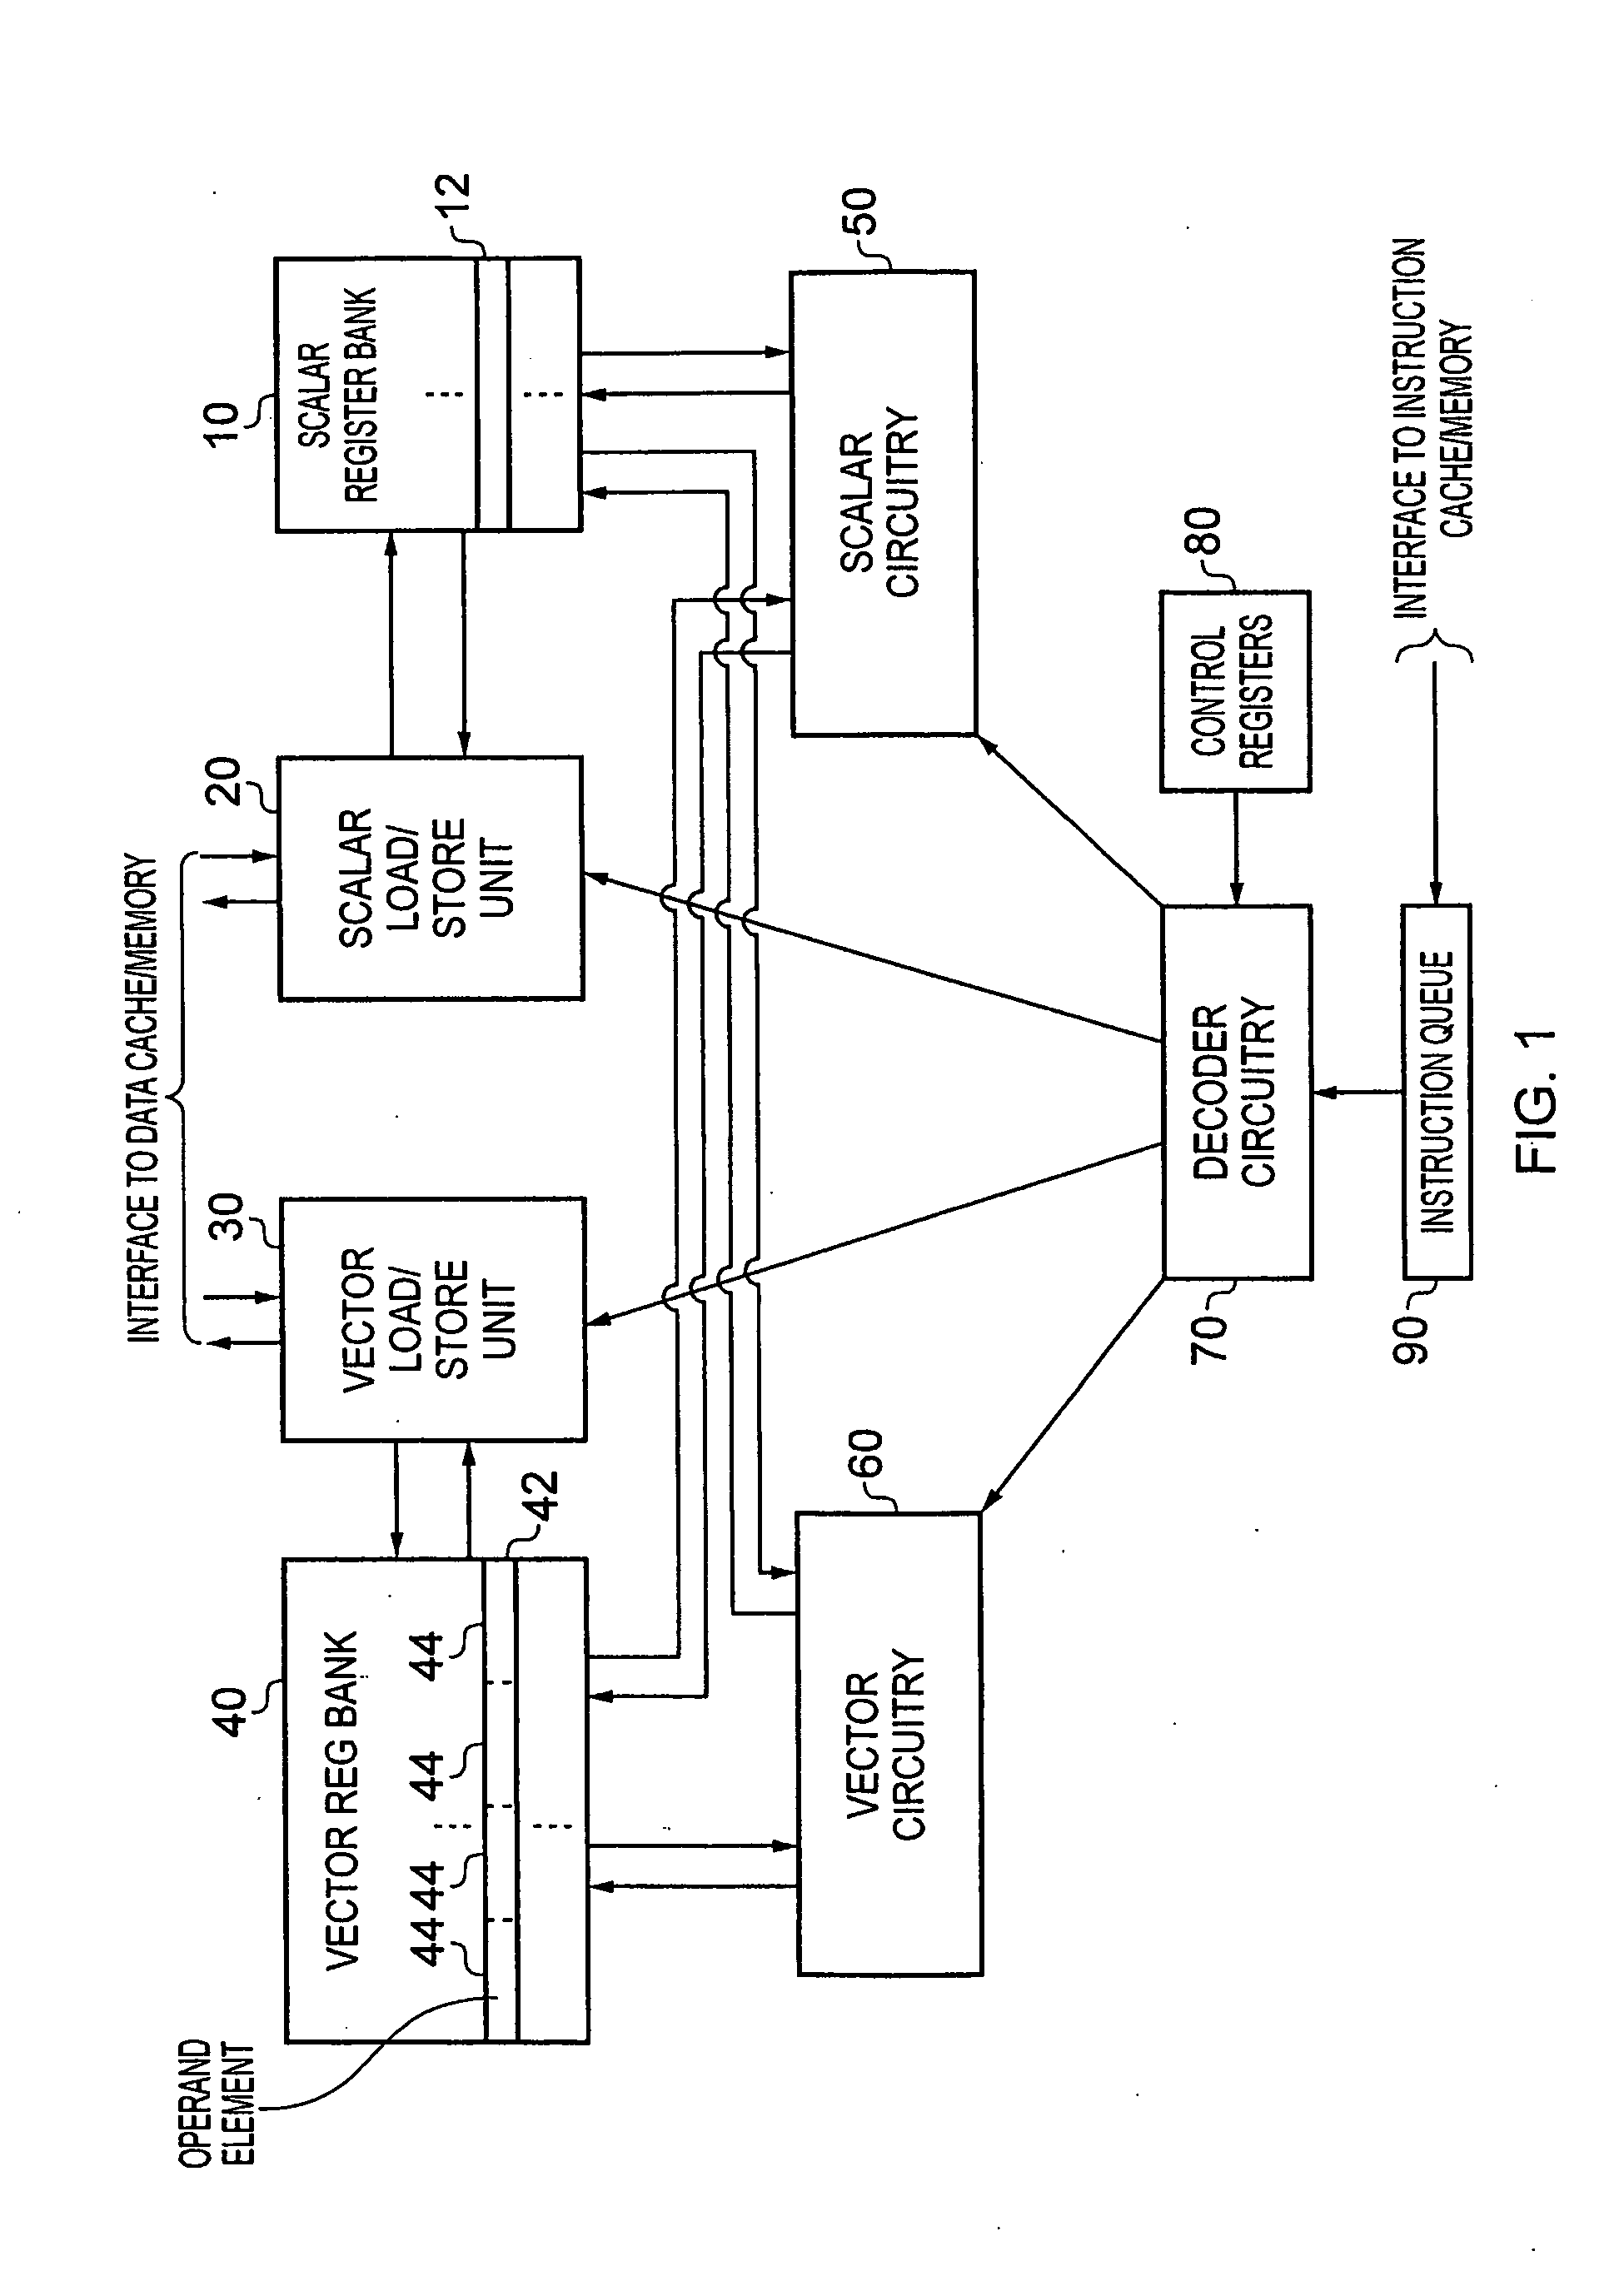 Data processing apparatus and method for performing vector operations